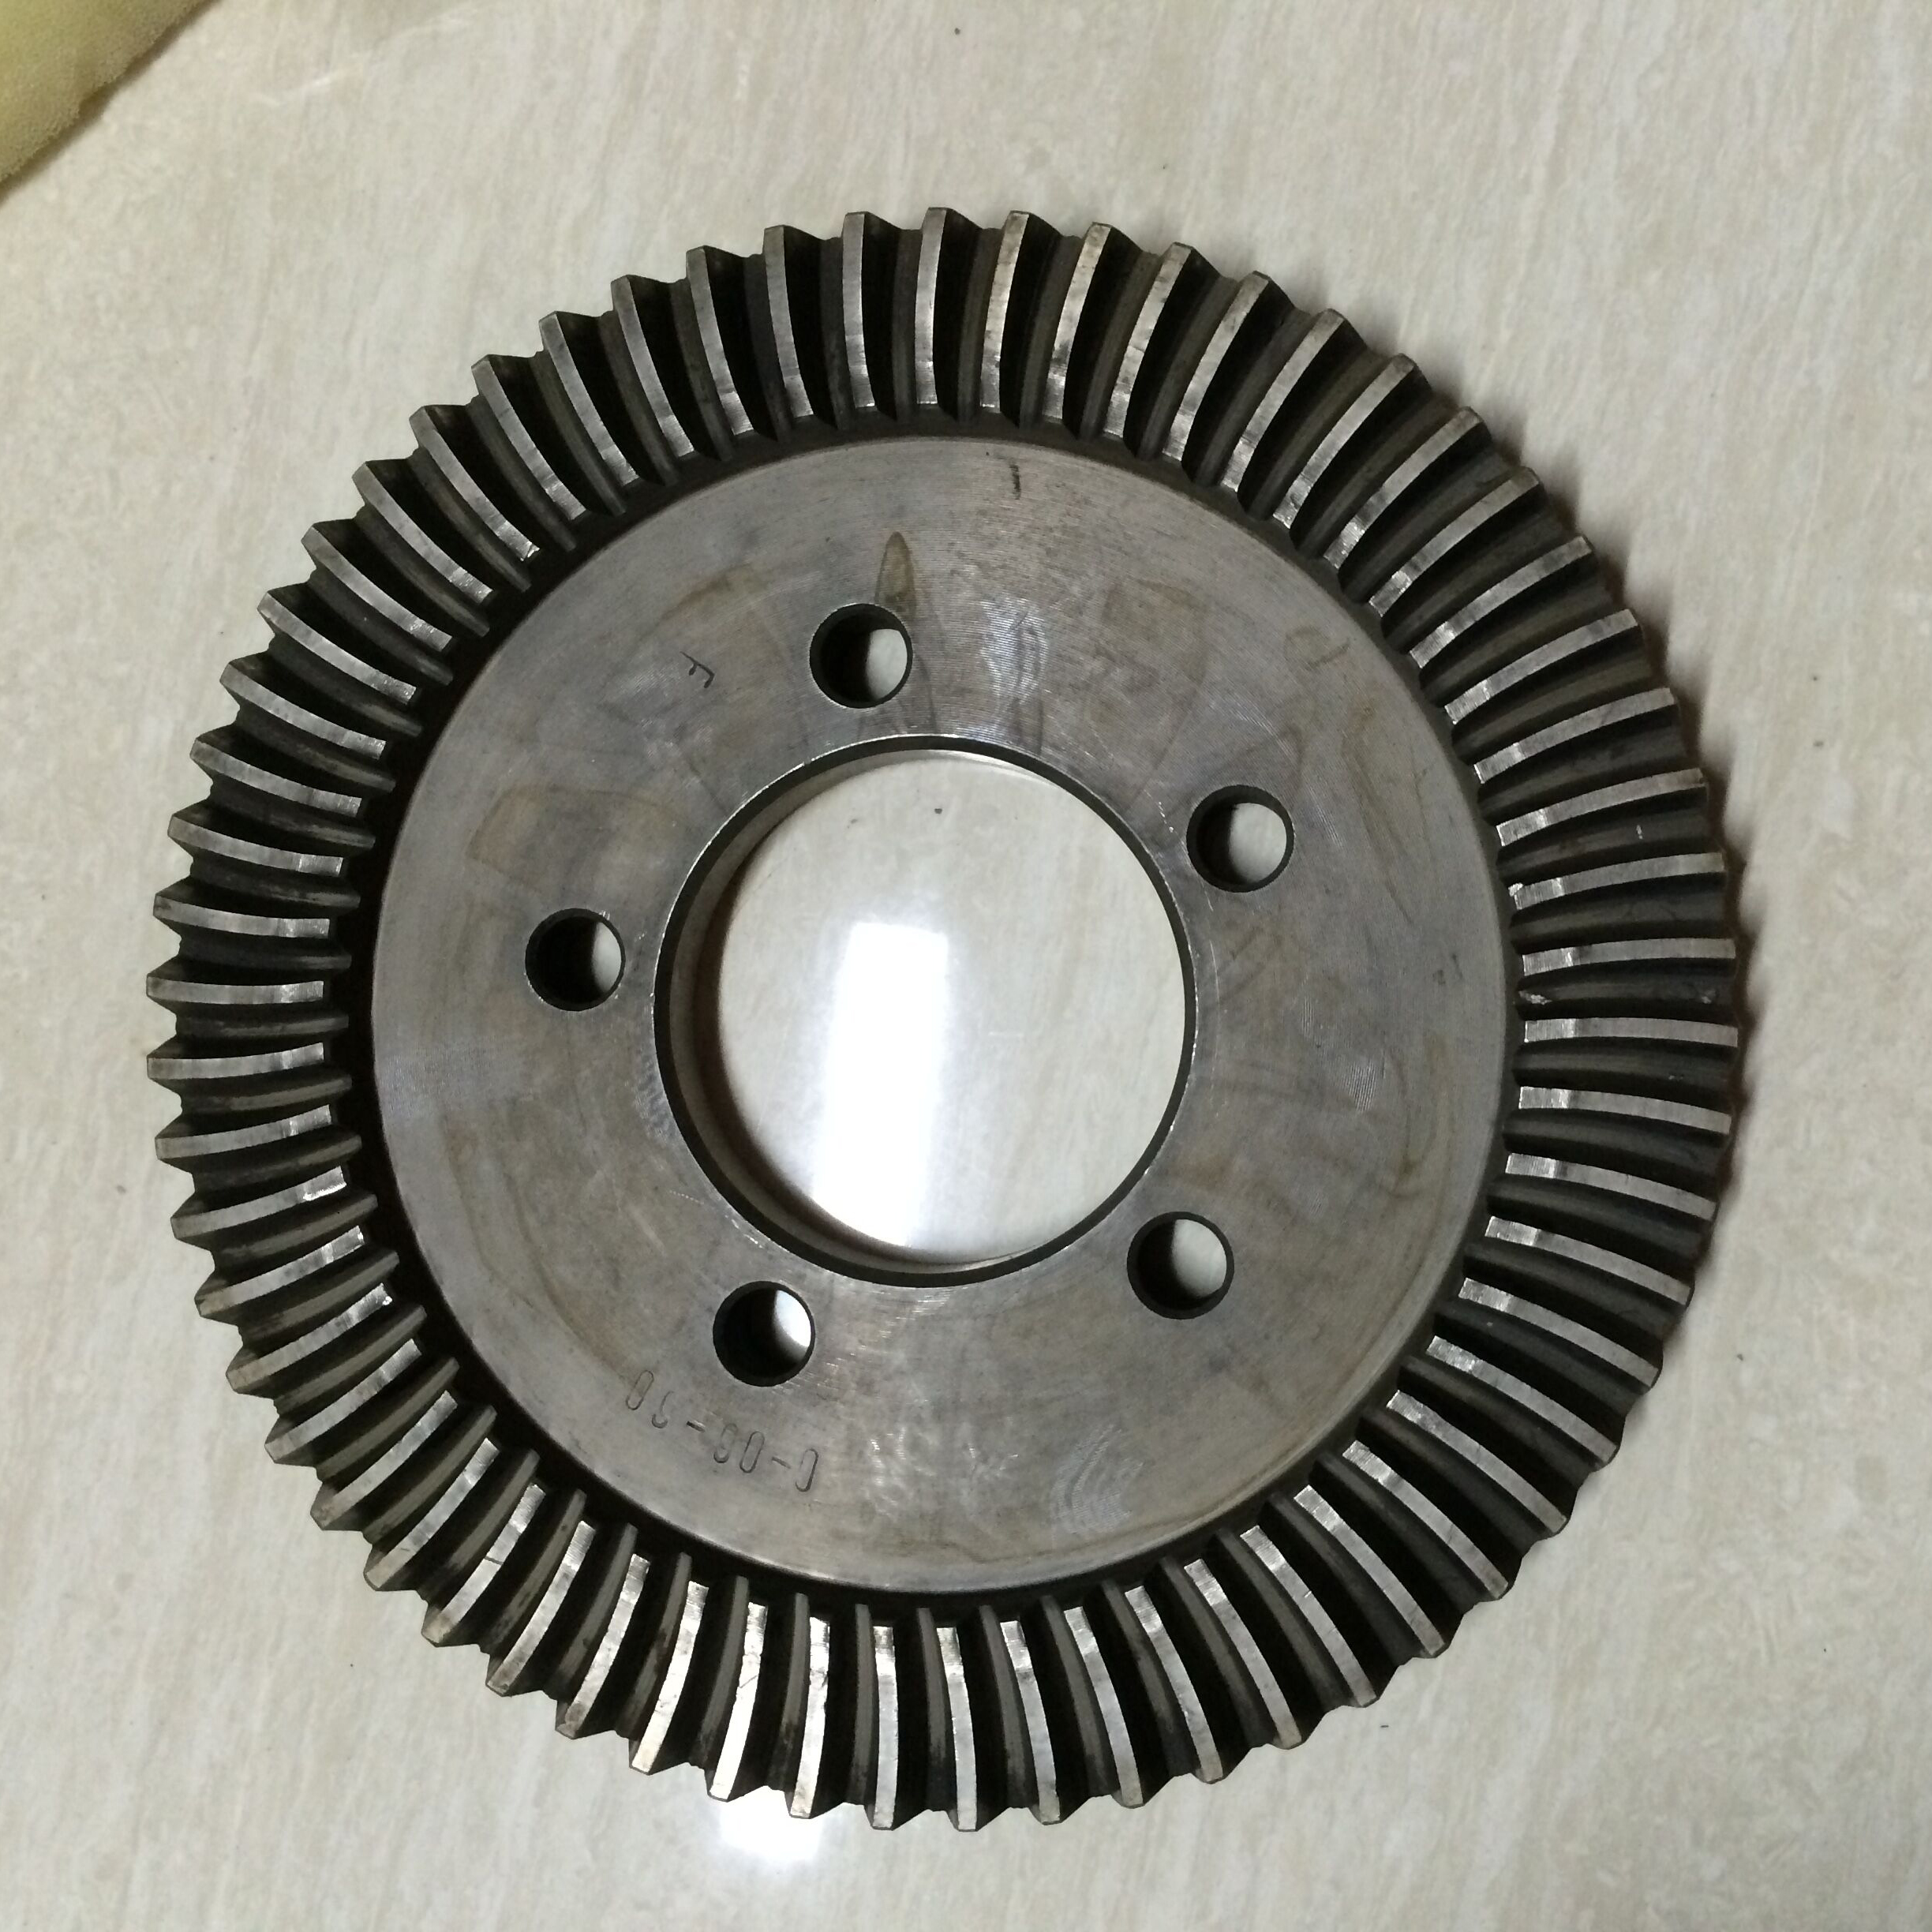 High PerformanceSpare Parts For Narrow Fabric Looms - Dobby part F19283601 Bevel Gear 2-1 60T – Sino